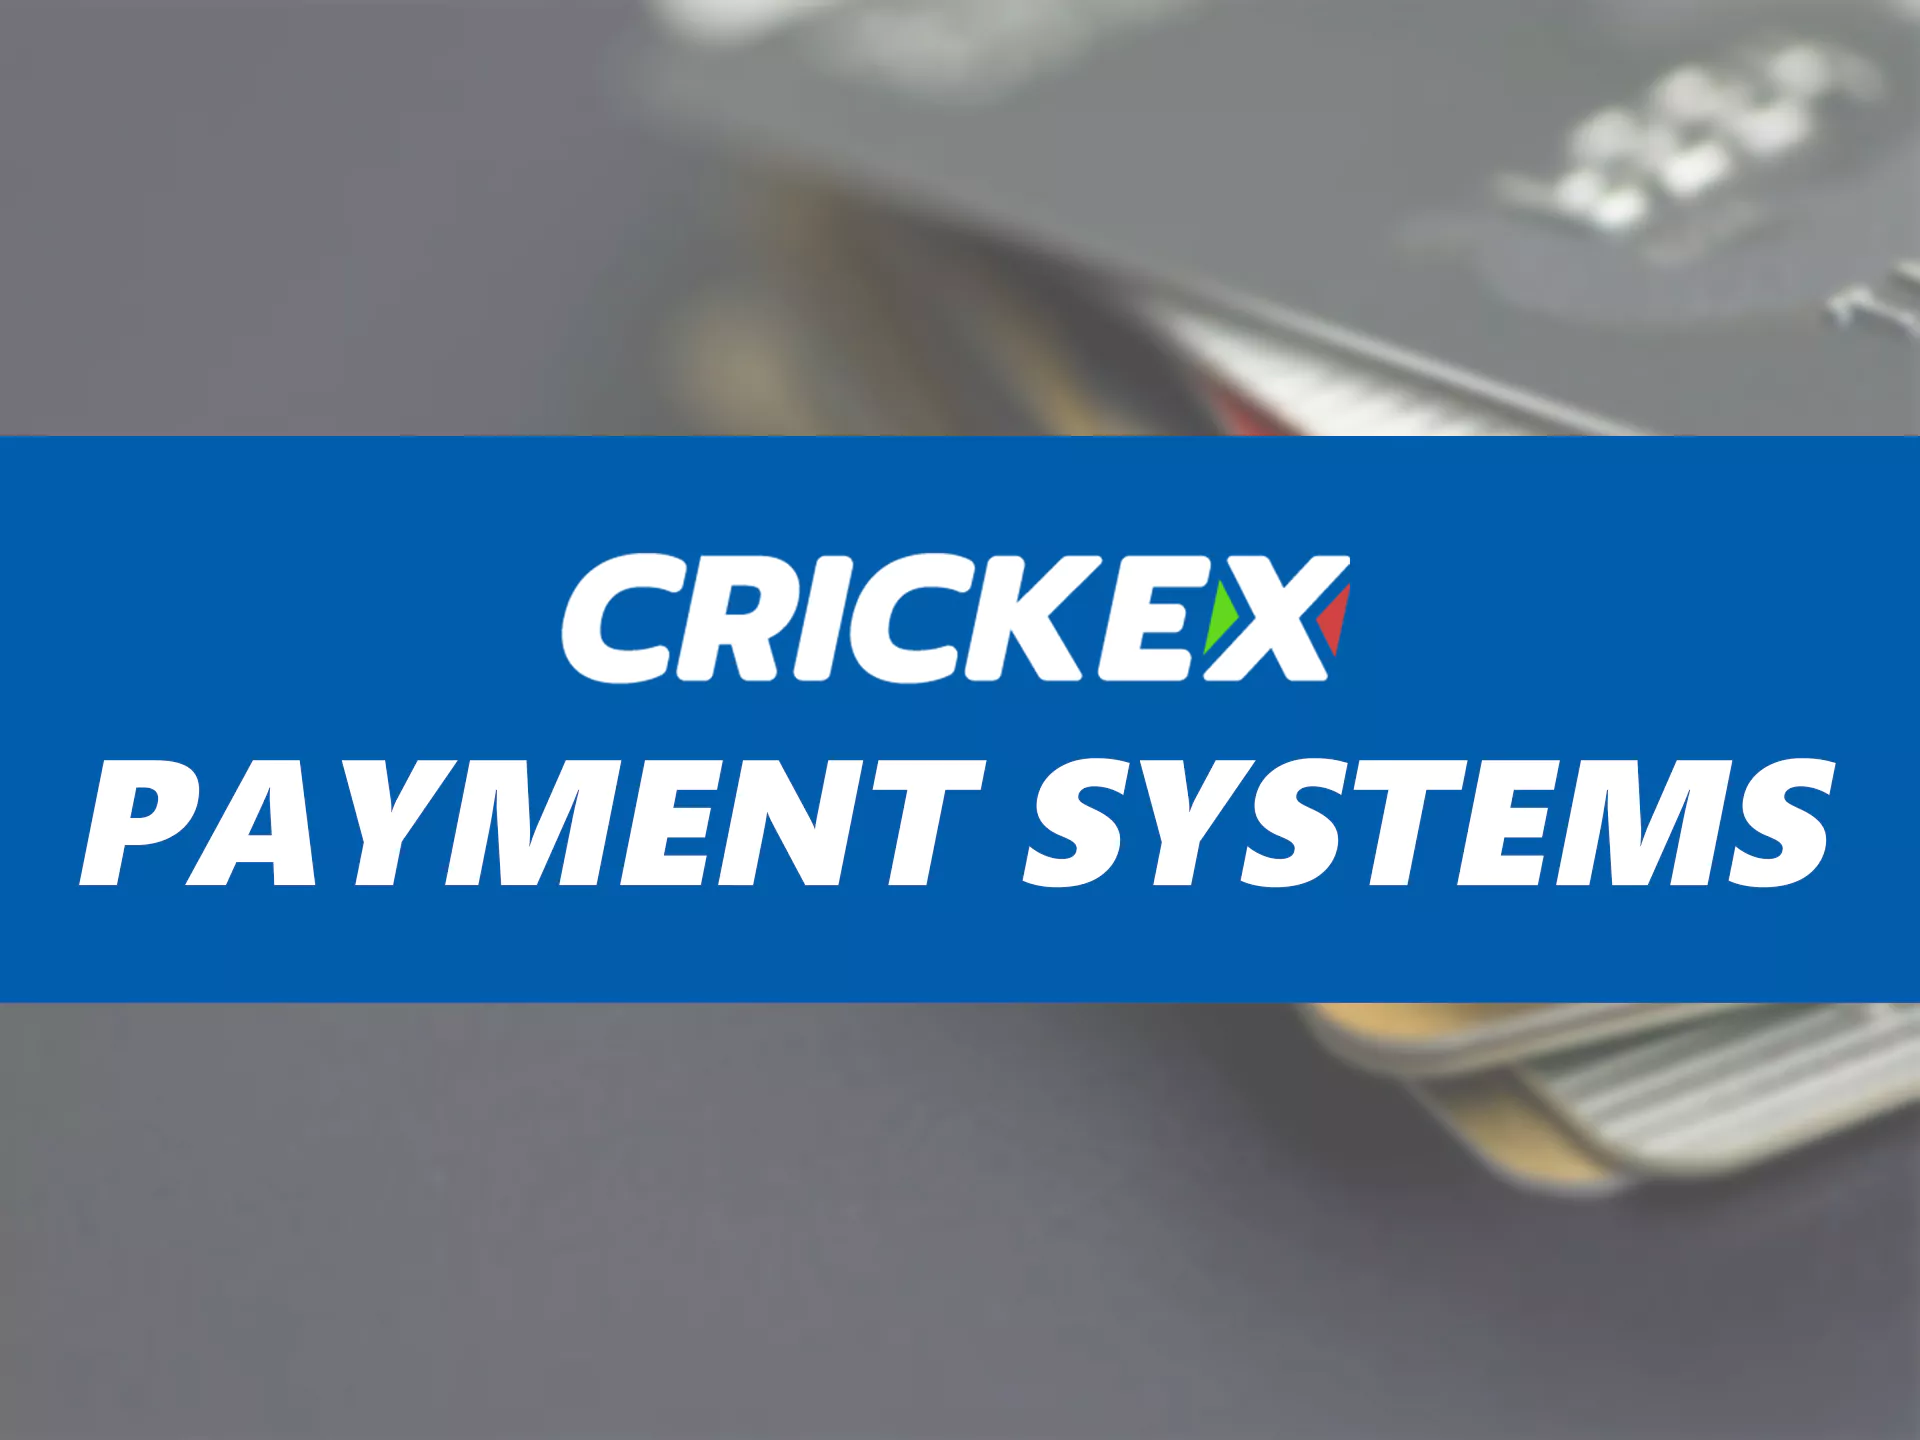 Choose from various payment systems for withdraw.